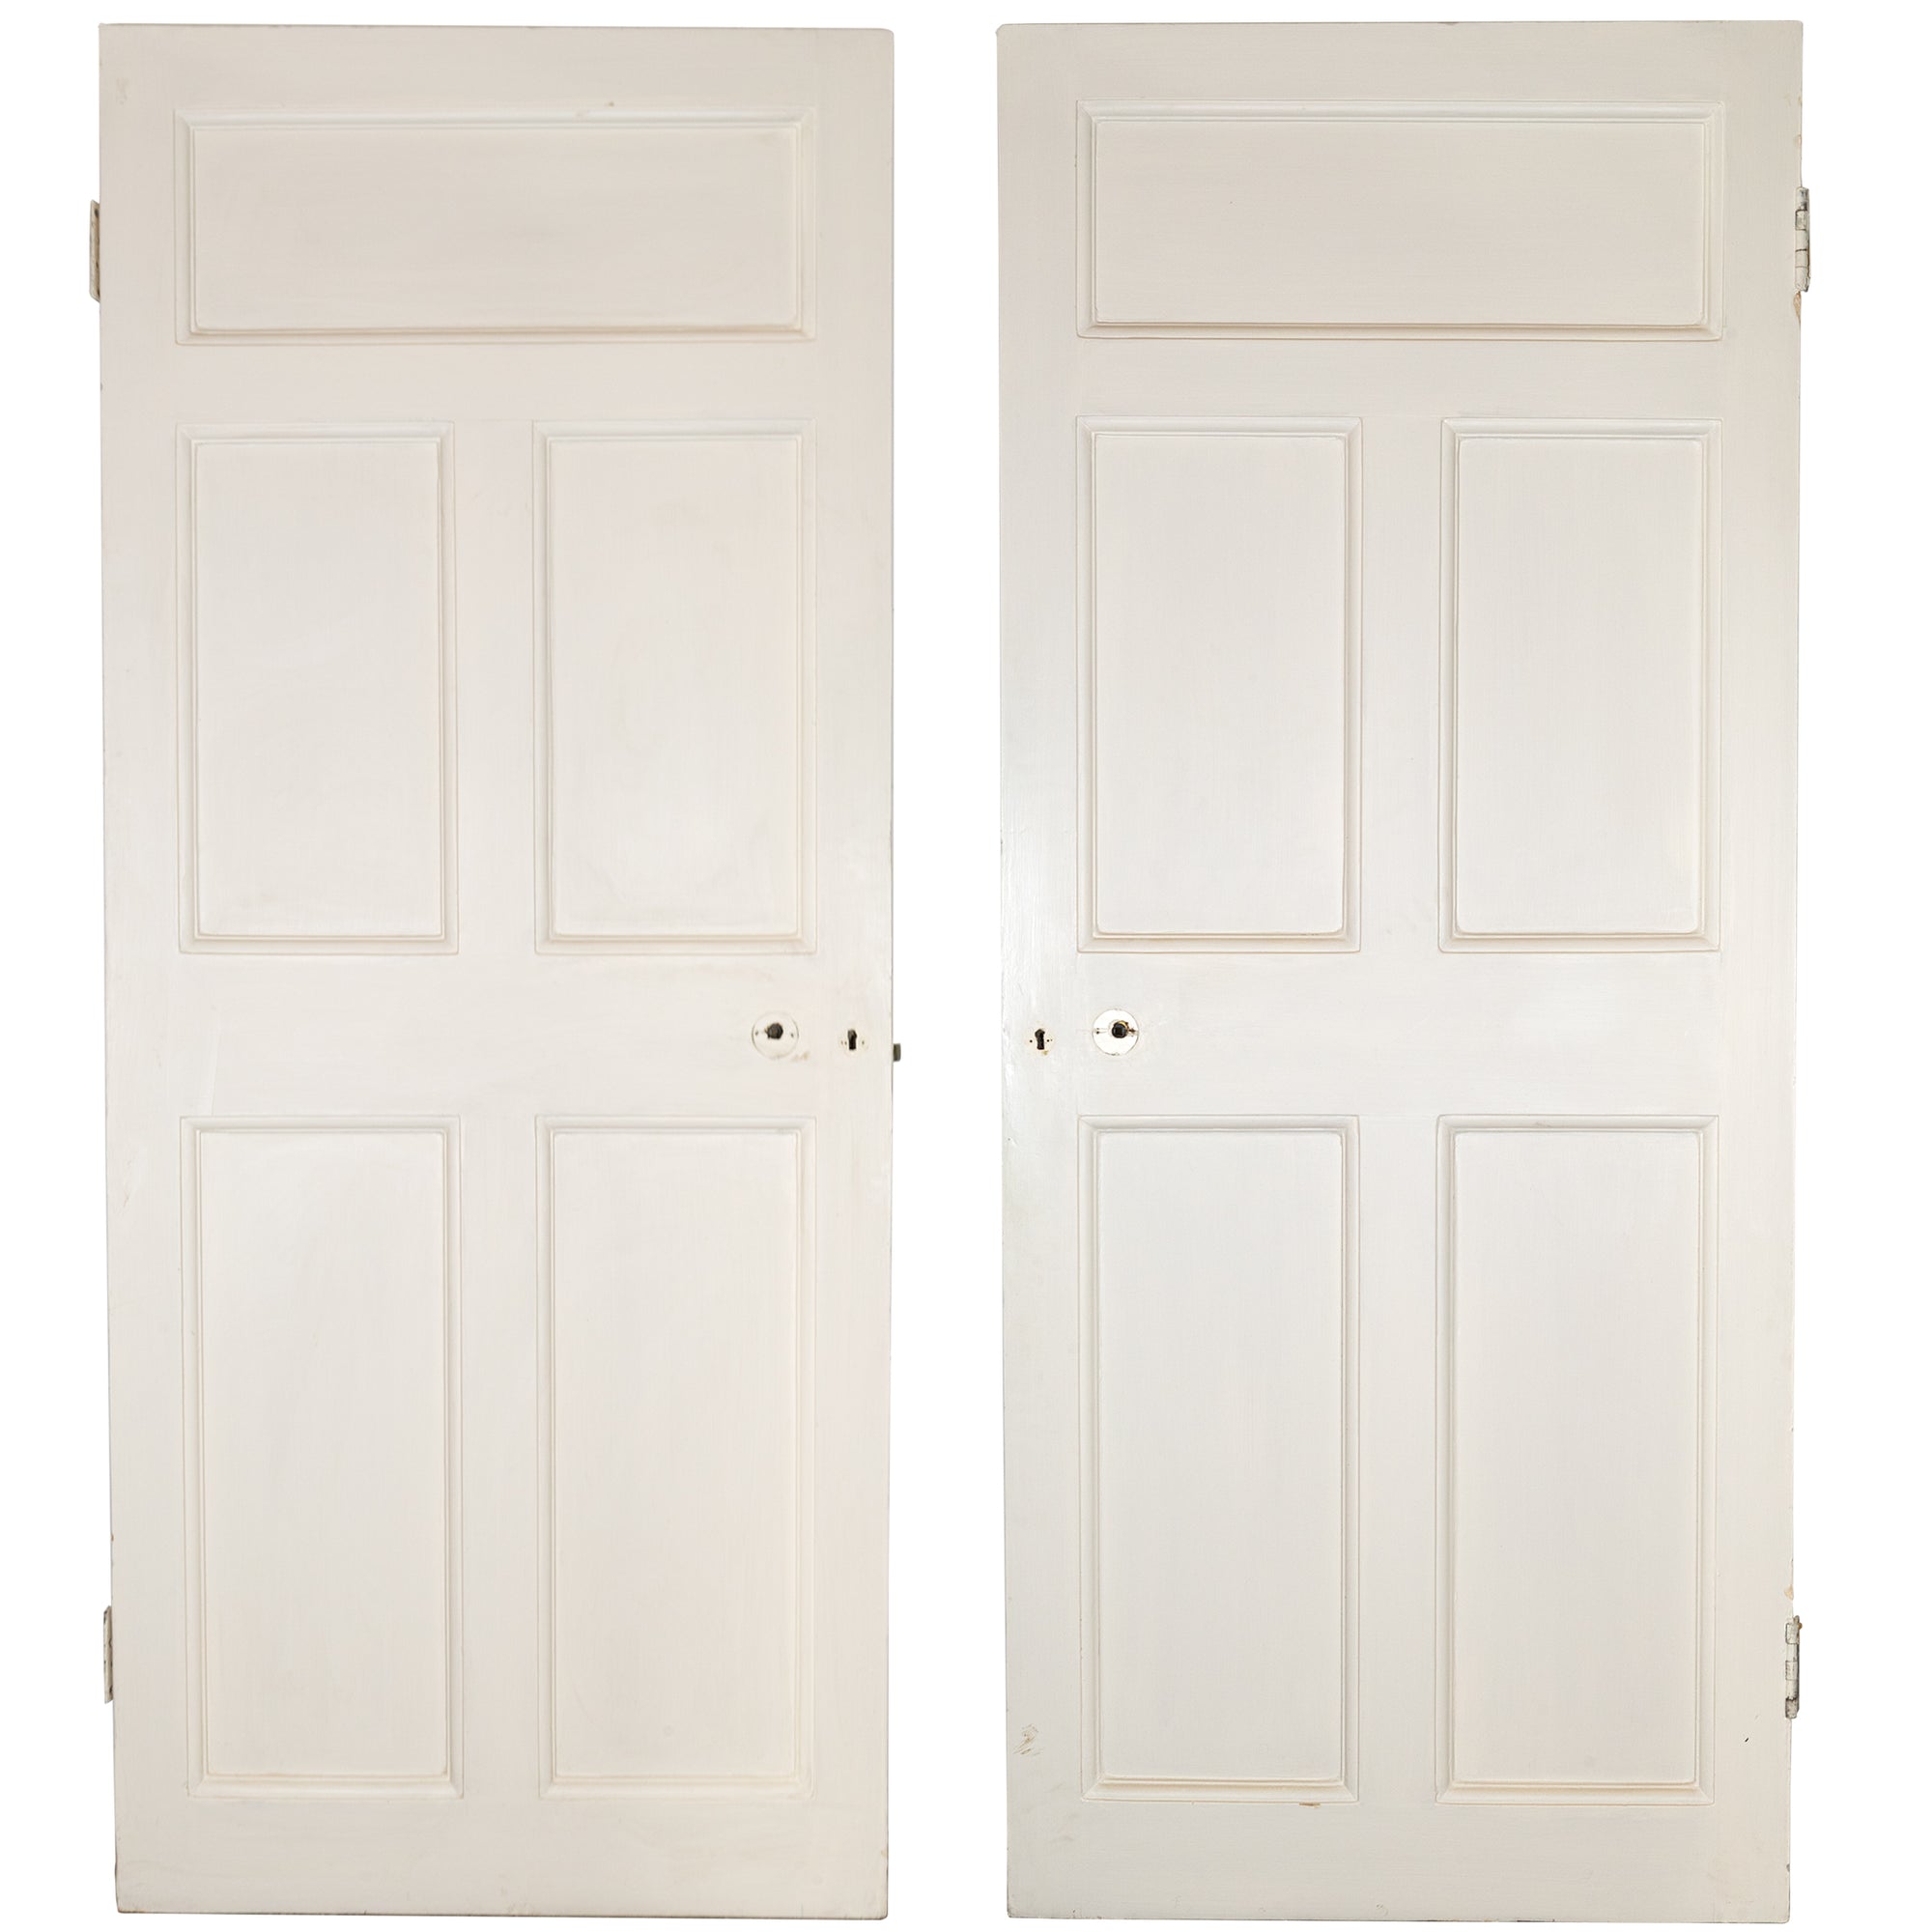 Antique Victorian Five Panel Door - Various Sizes Available | The Architectural Forum